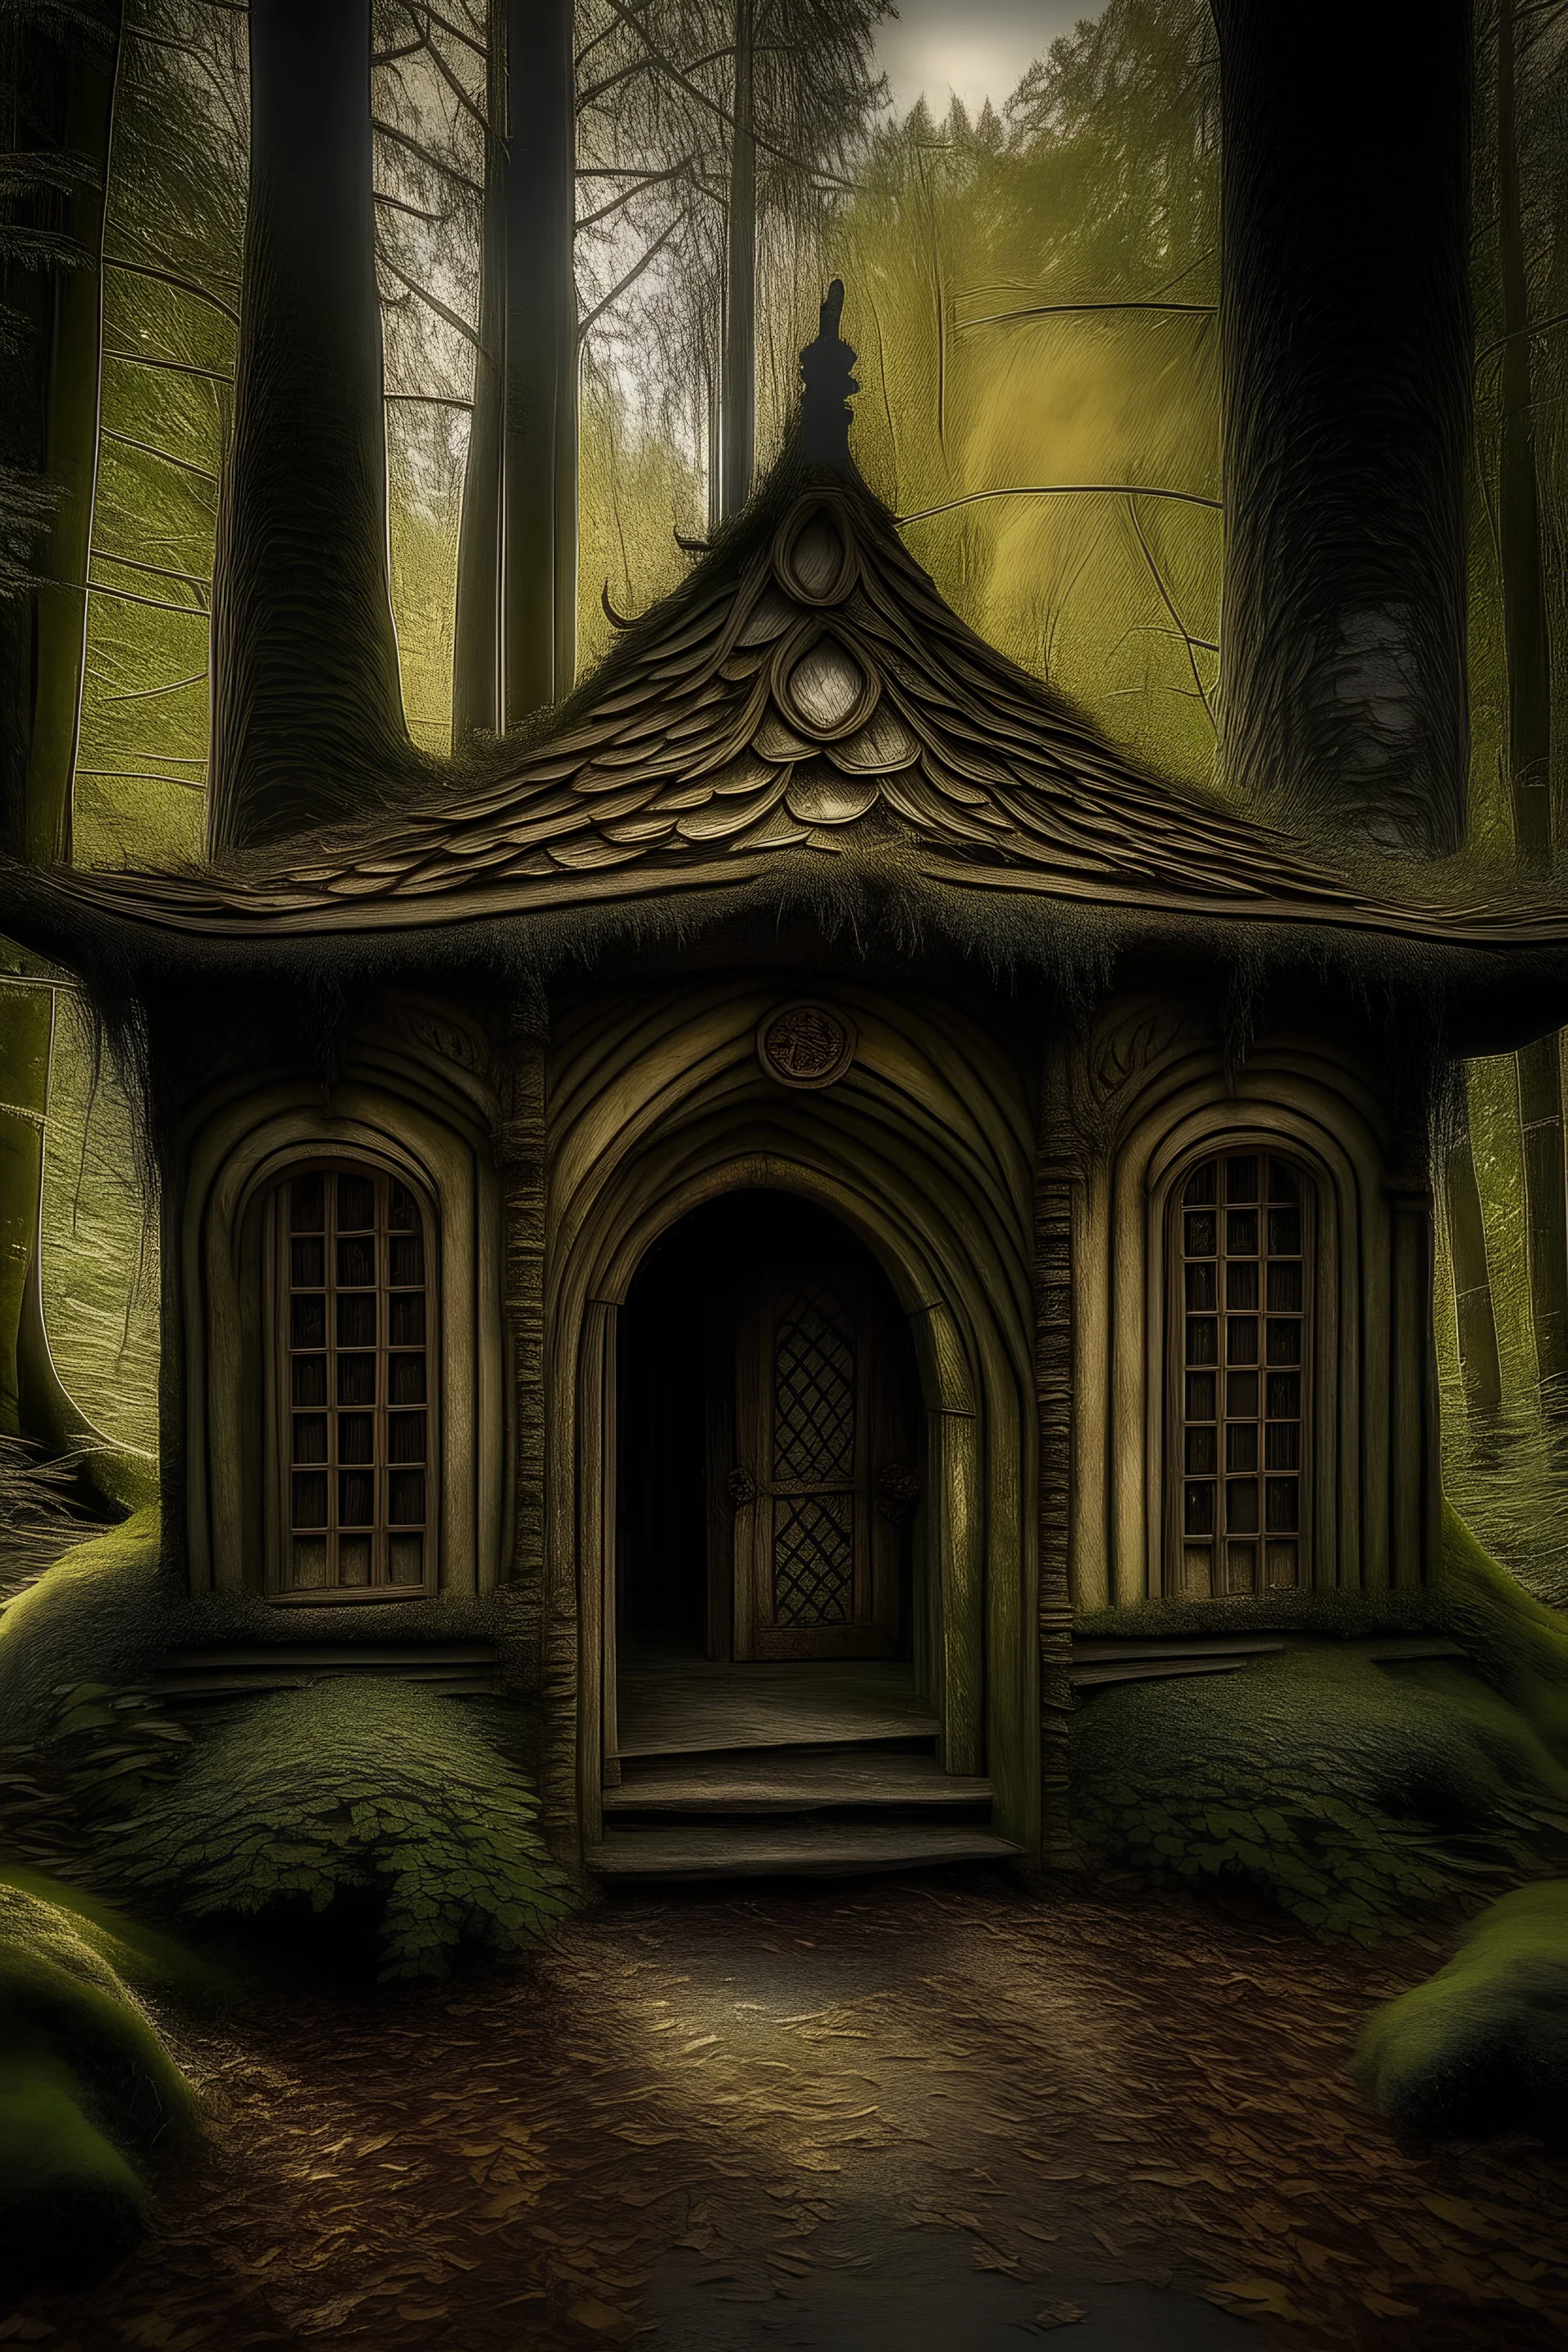 A cottage in the middle of a wood and on the roof is carved "The portal in the big woods"